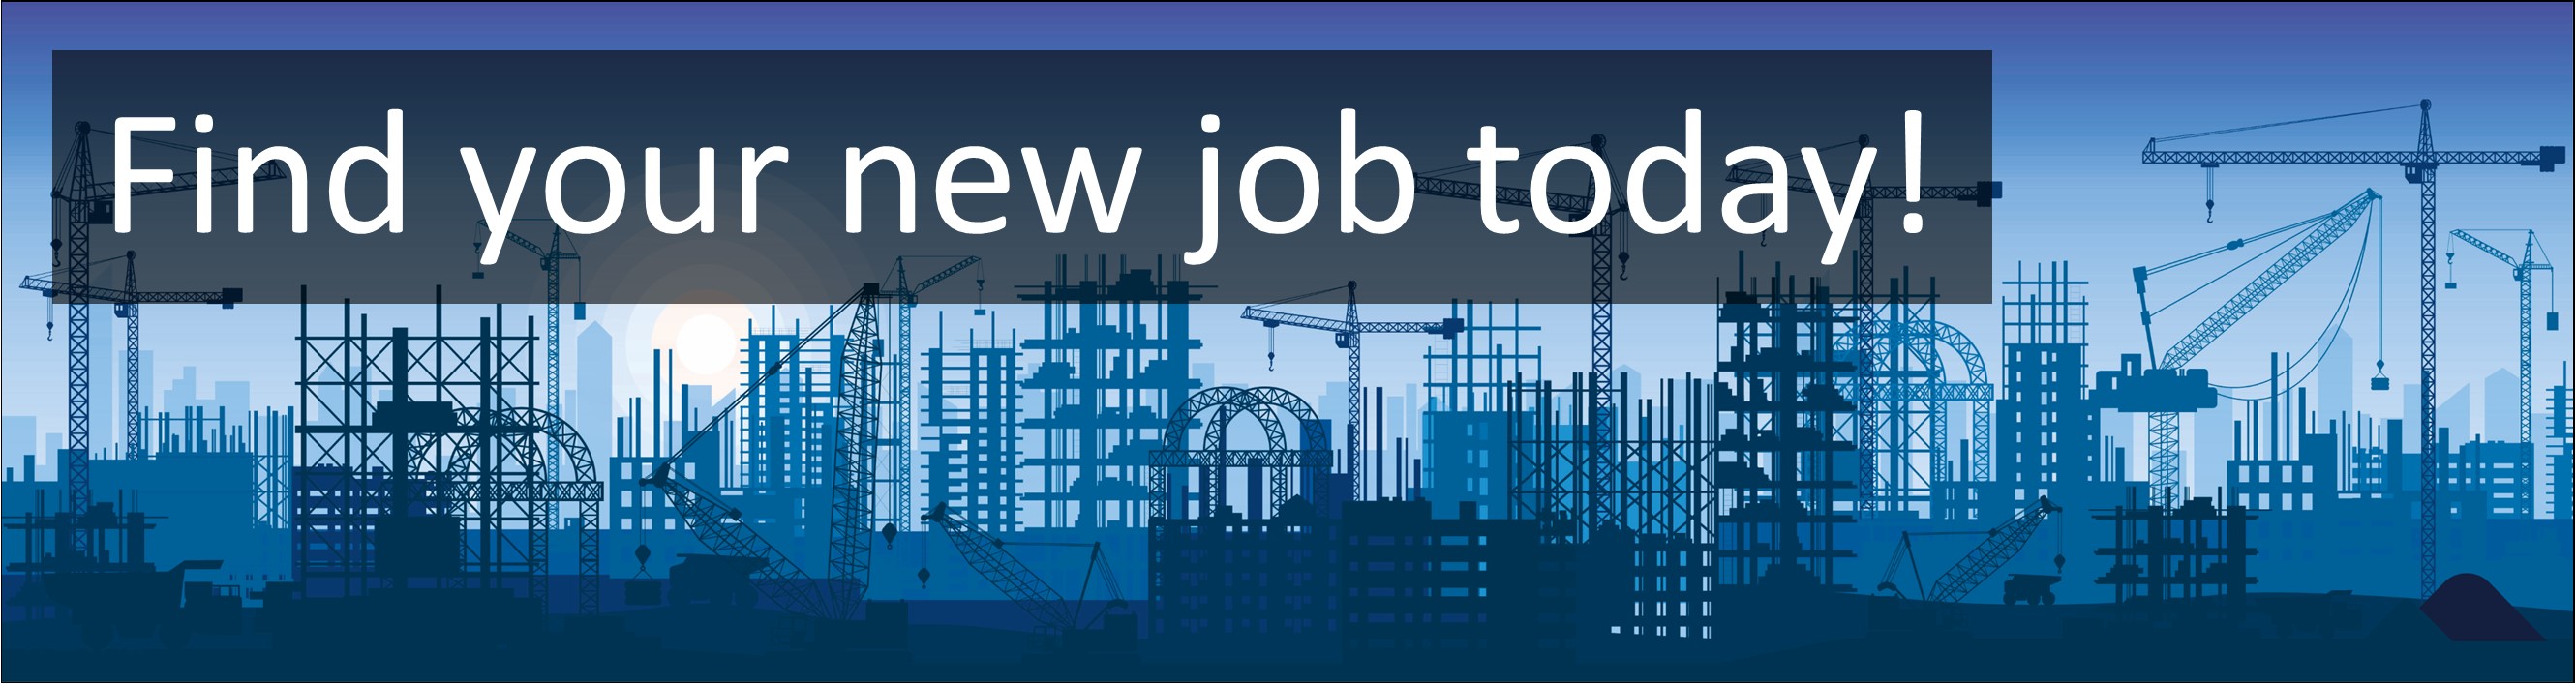 Construction & Trades Jobs. Trainee Manufacturing Support Operative / Multi-Skilled Trades / Construction / Entry Level Jobs, Careers & Vacancies in Add the Plymouth, Devon, South West England Advertised by AWD online – Multi-Job Board Advertising and CV Sourcing Recruitment Services